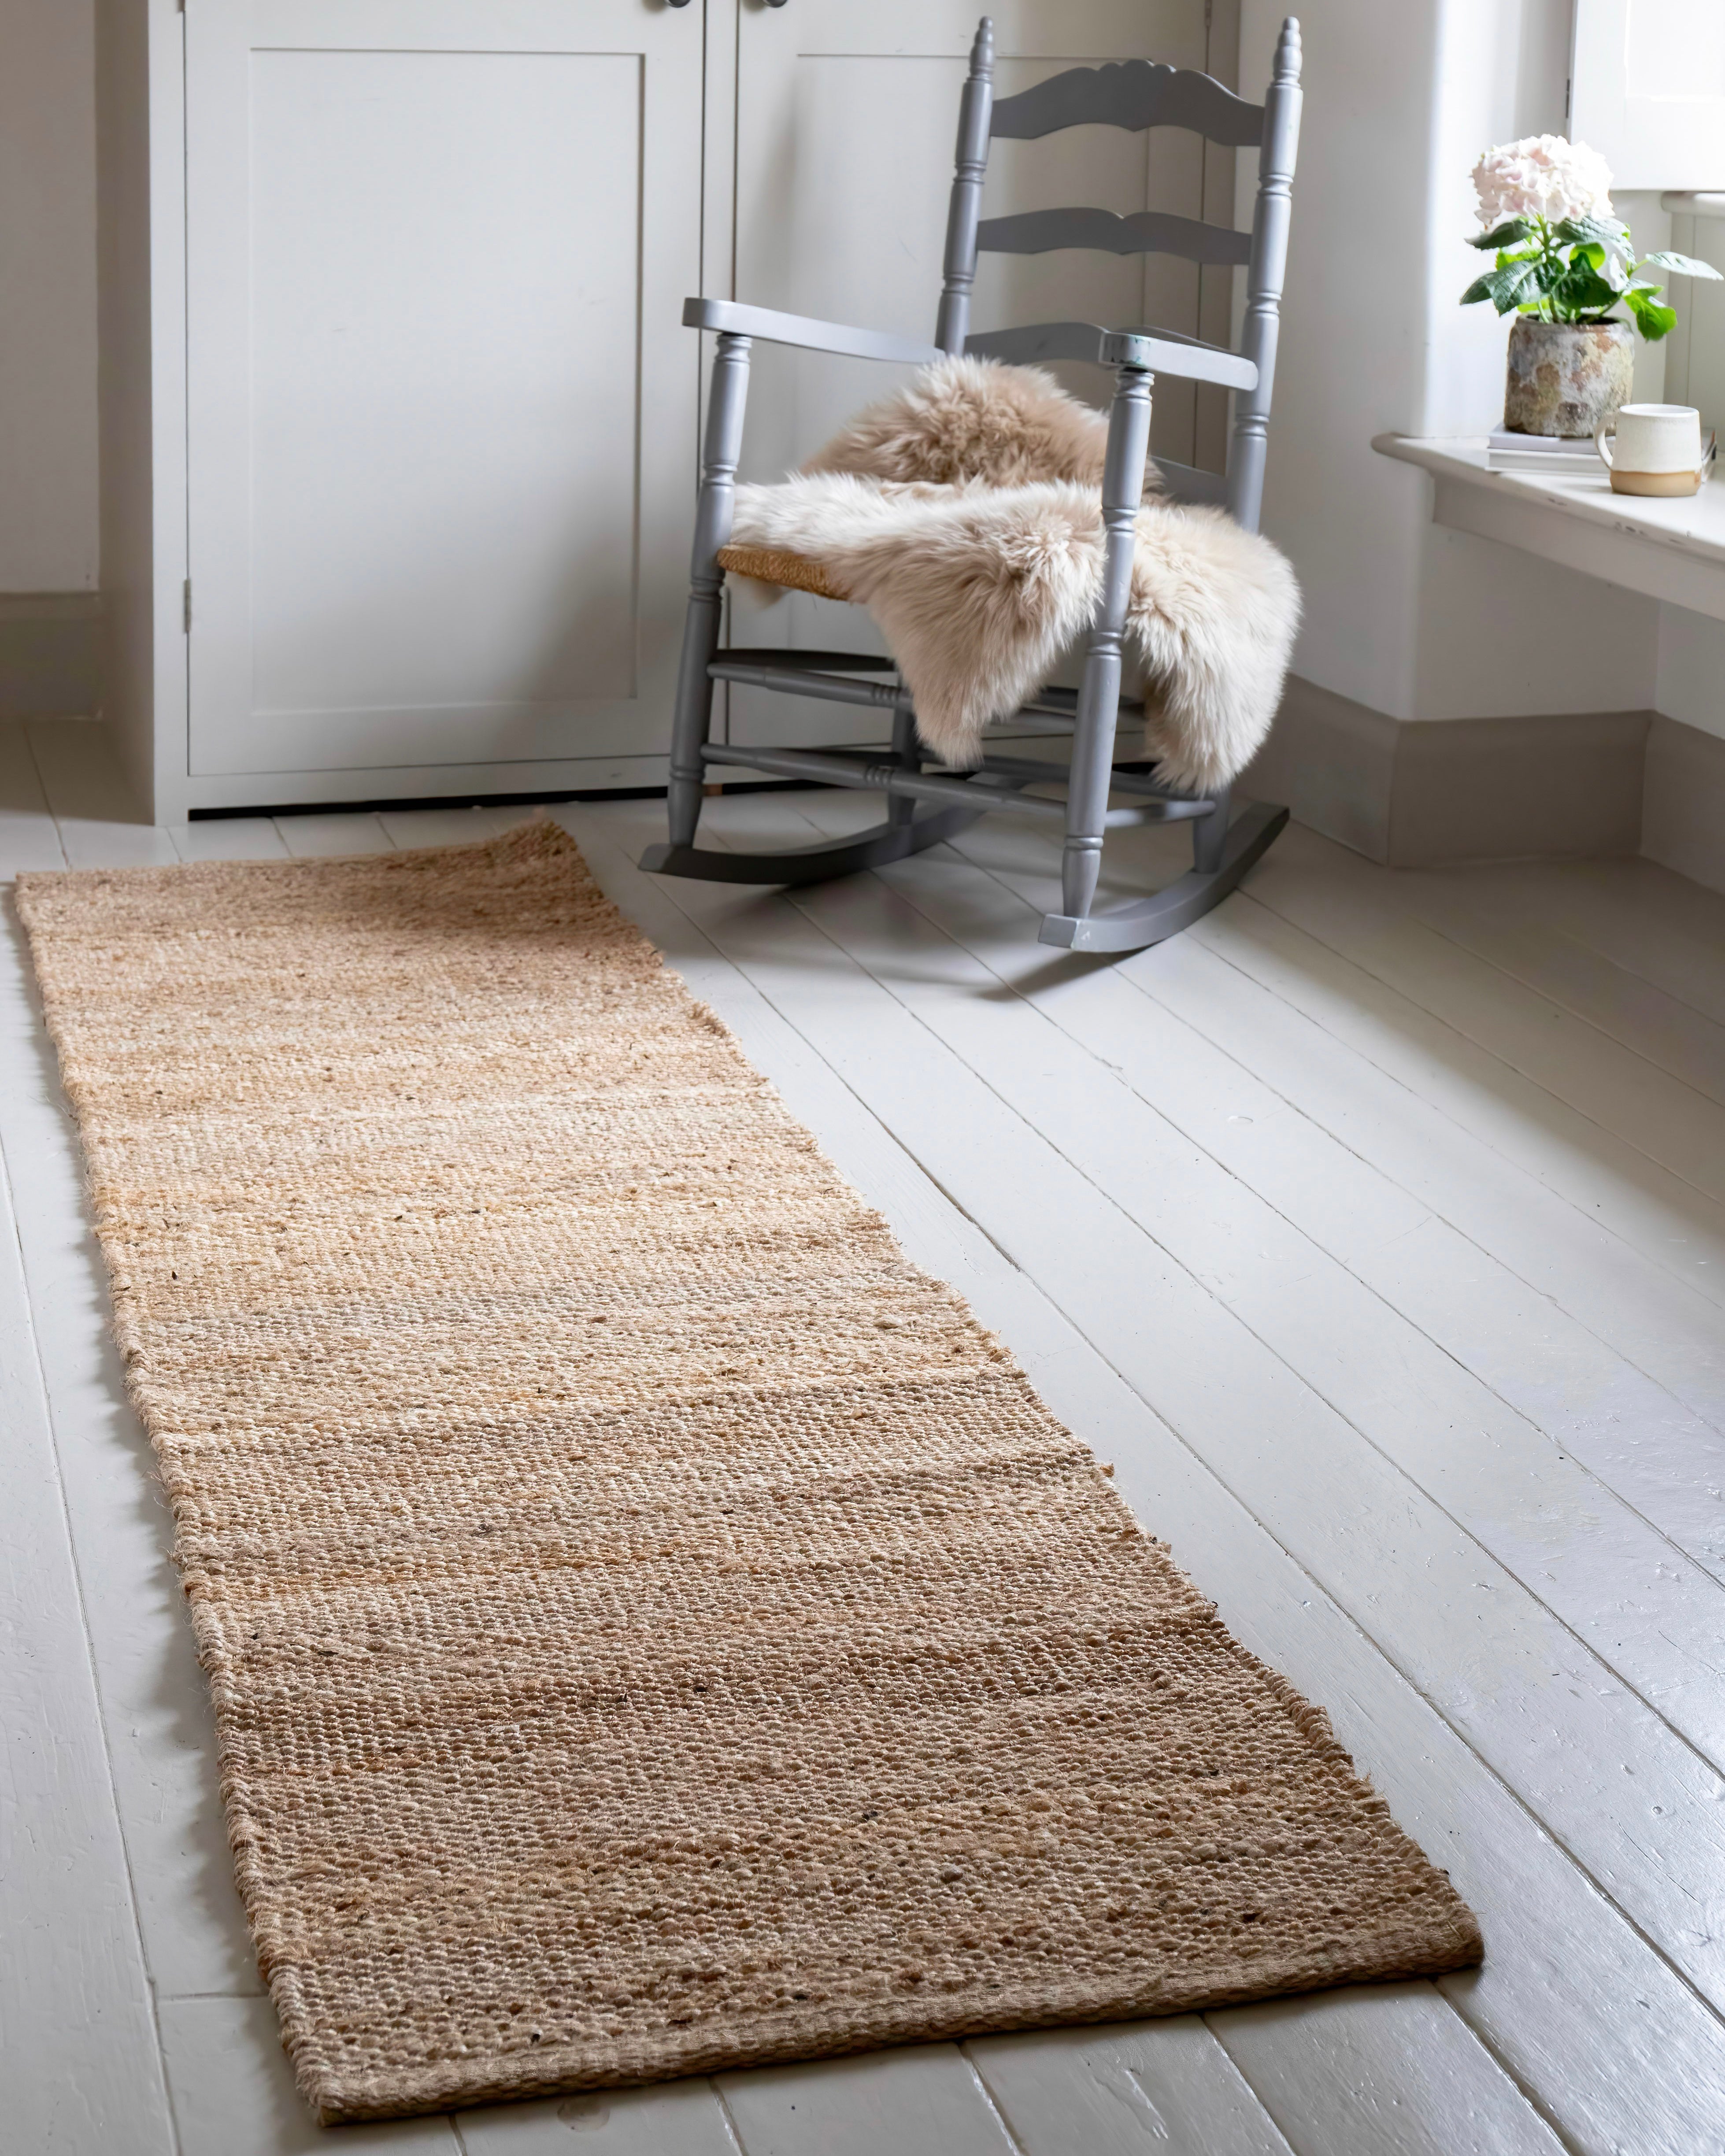 Why You'll Love This Washable Jute-Like Rug